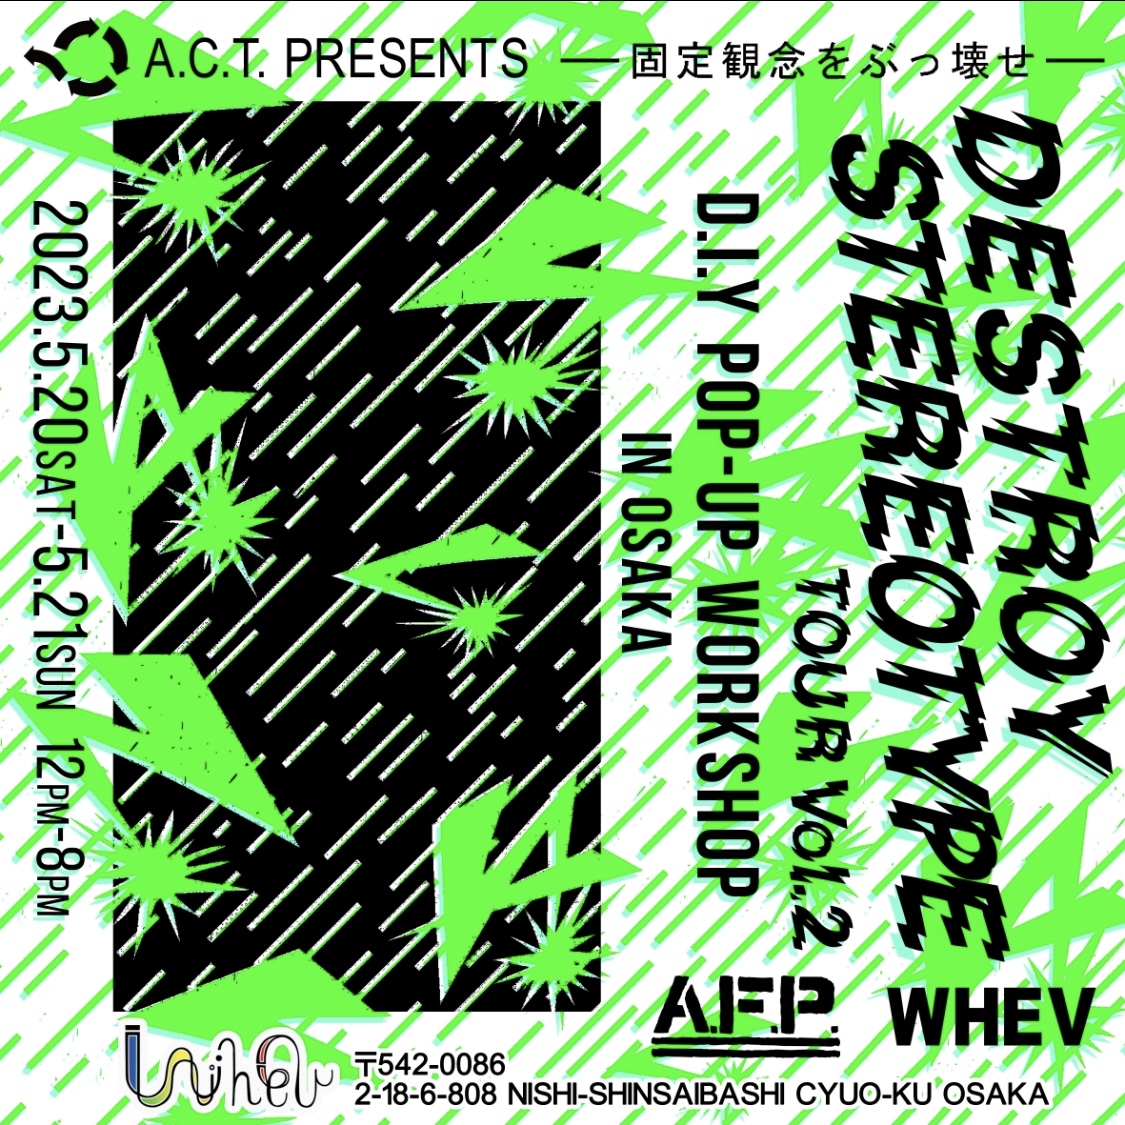 A.C.T. PRESENTS DESTROY STEREOTYPE at WHEV